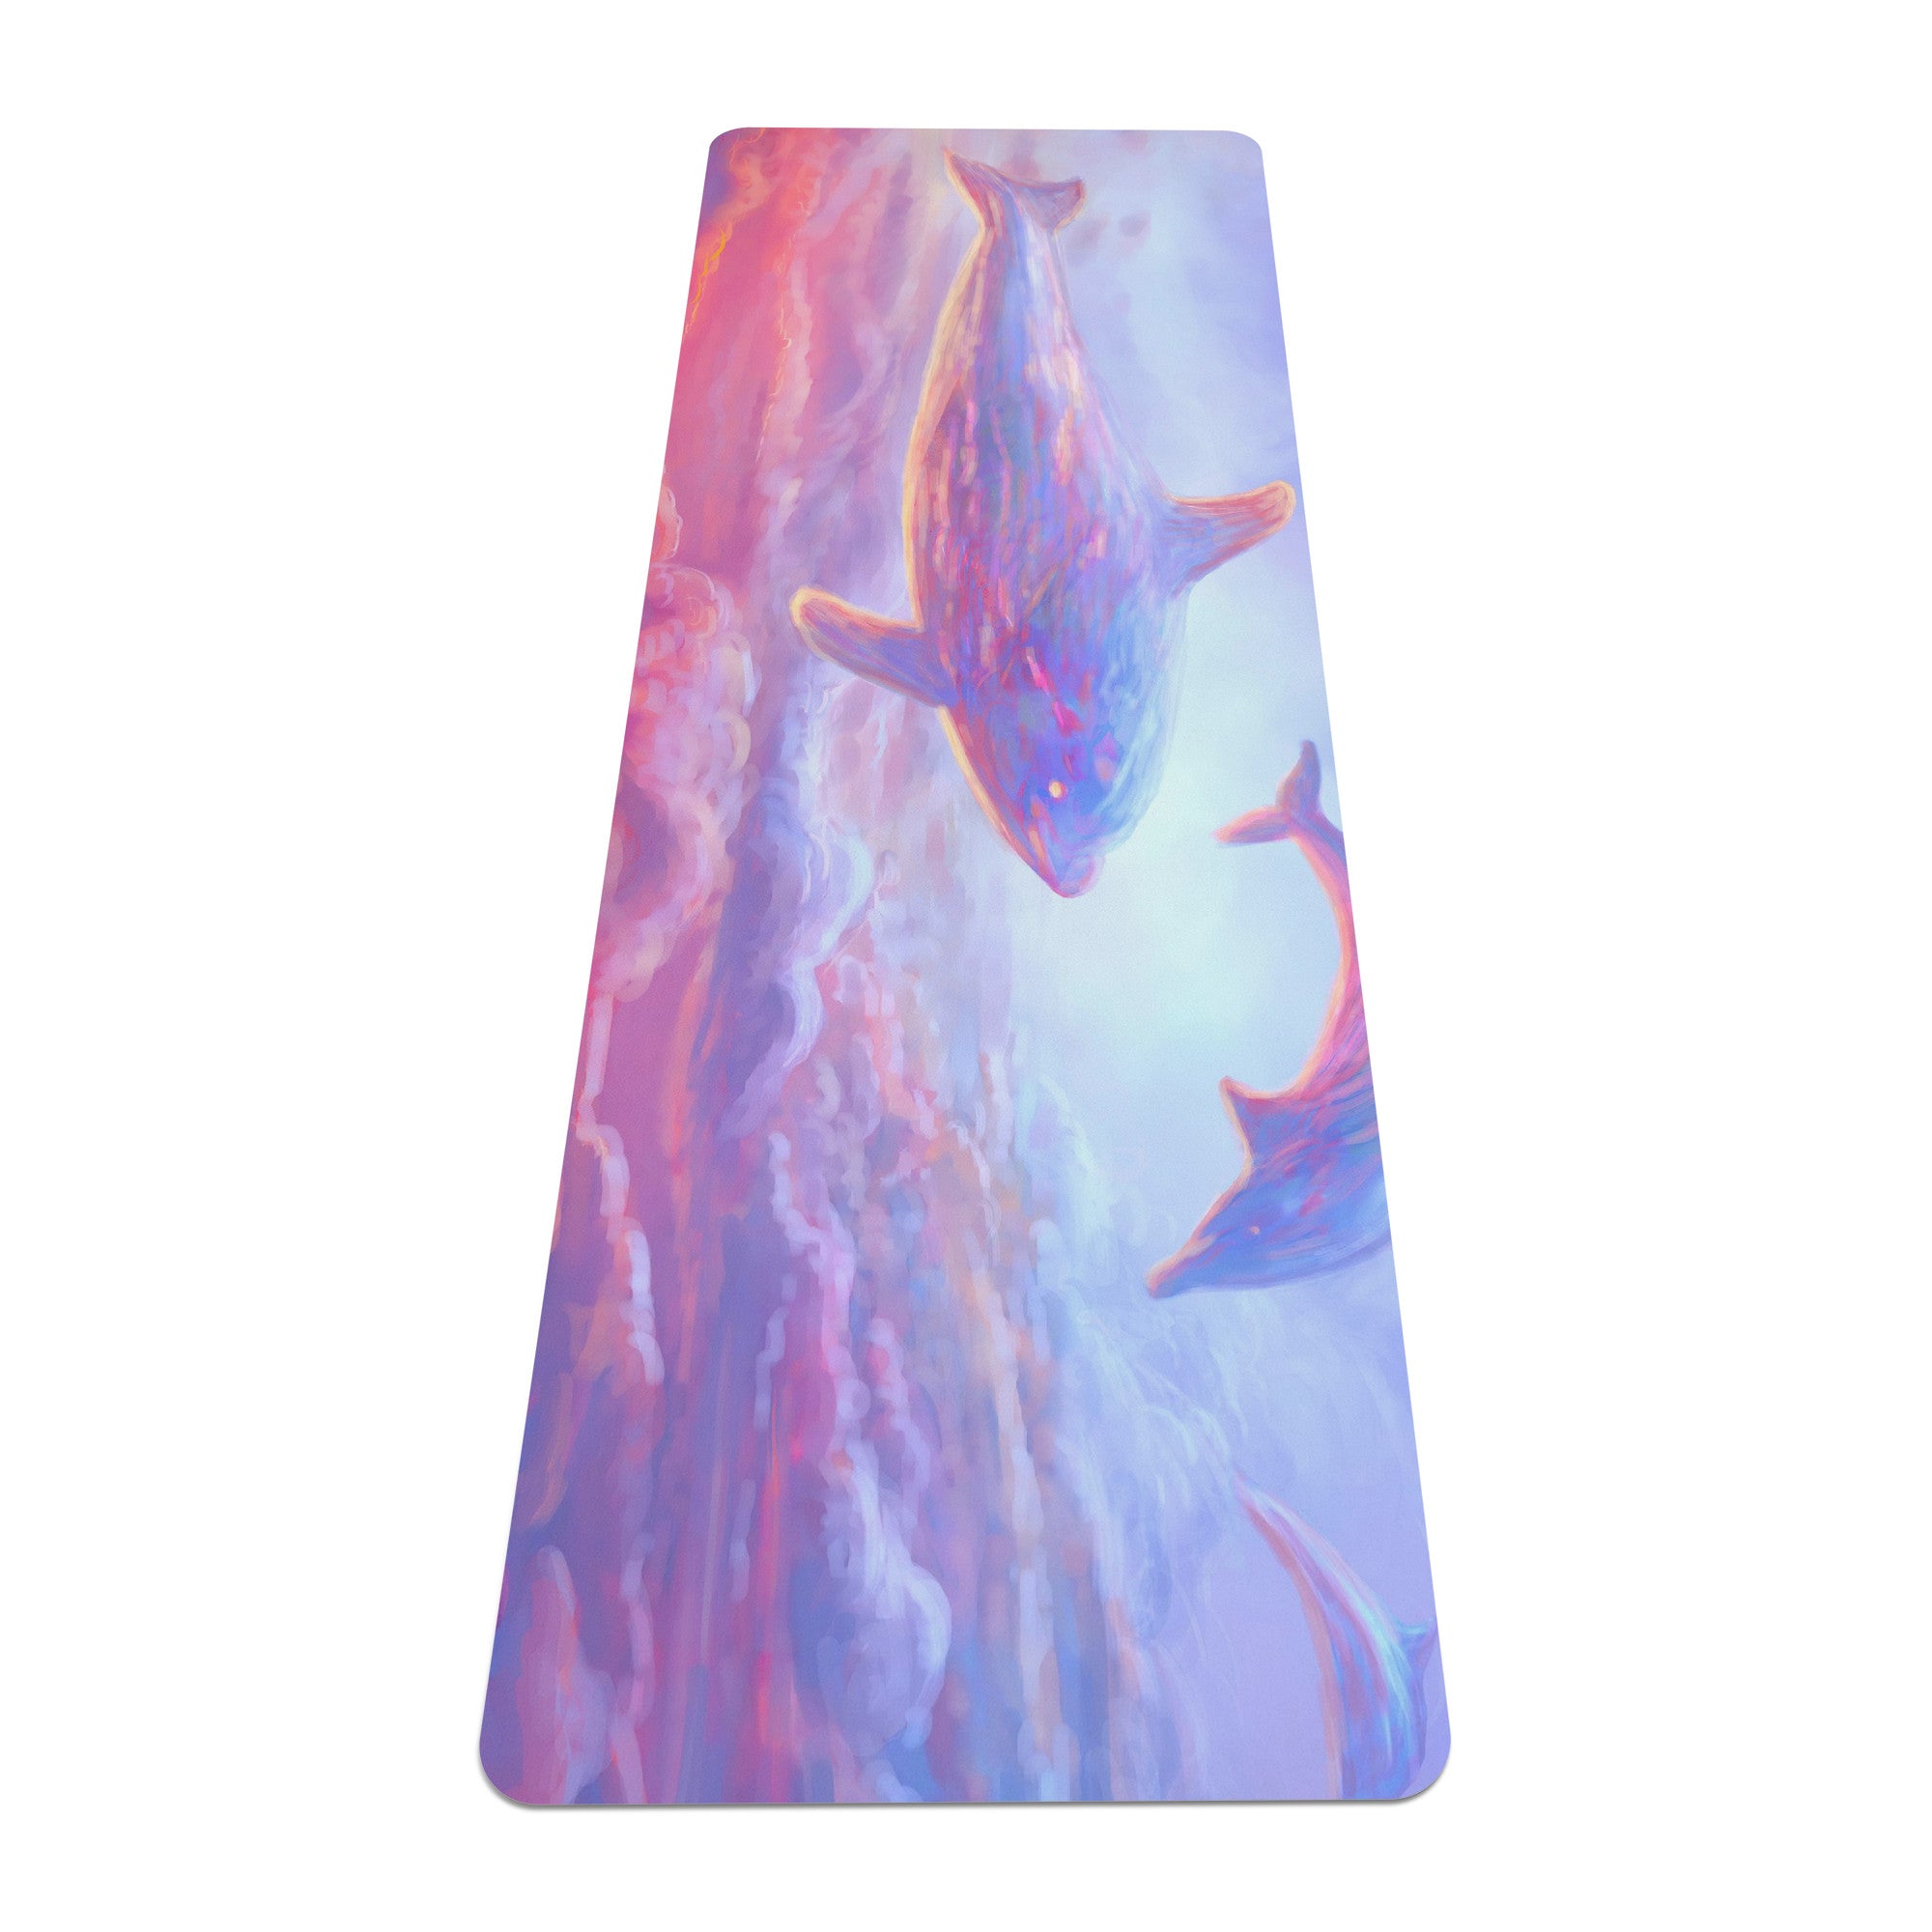 Dolphins Sky - Zen Rubber Yoga Mat  - Anime Lovers Style - non-slip bottom - Personal Hour for Yoga and Meditations 